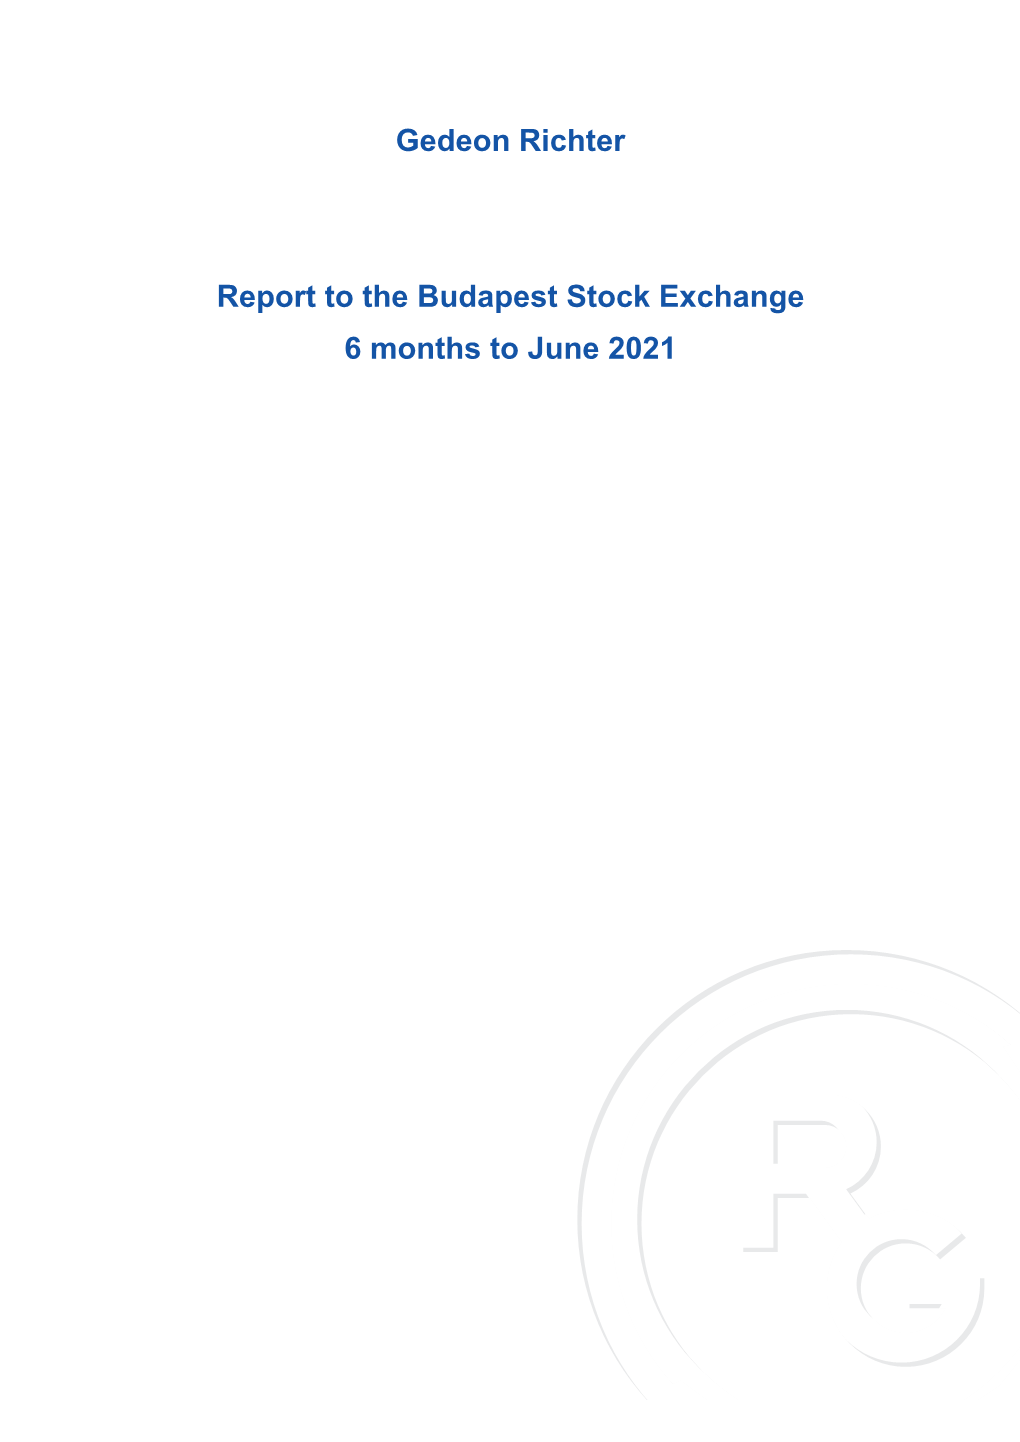 Gedeon Richter Report to the Budapest Stock Exchange 6